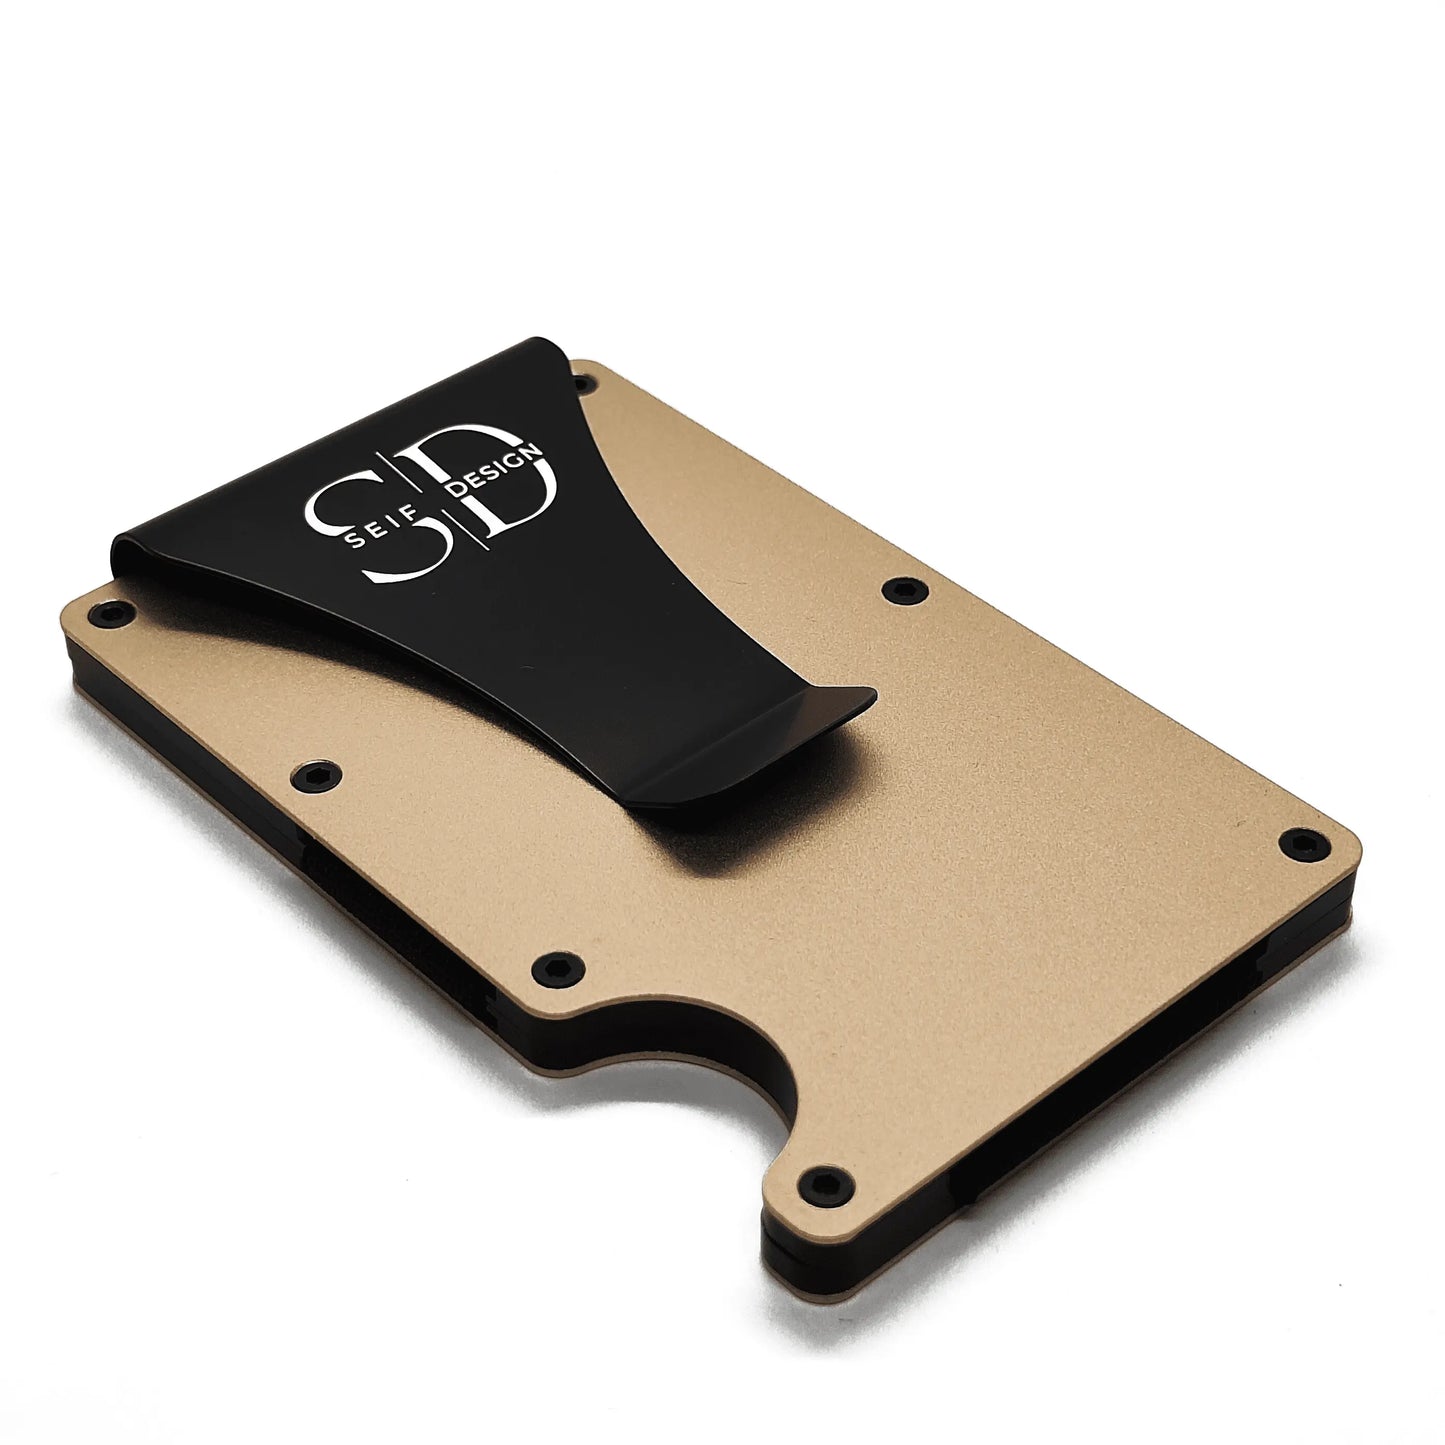 Sleek aluminum cardholder with RFID blocking, holds up to 12 cards. Eco-friendly packaging. Lite Gold - Card Holder with RFID Blocking by Seif Design.